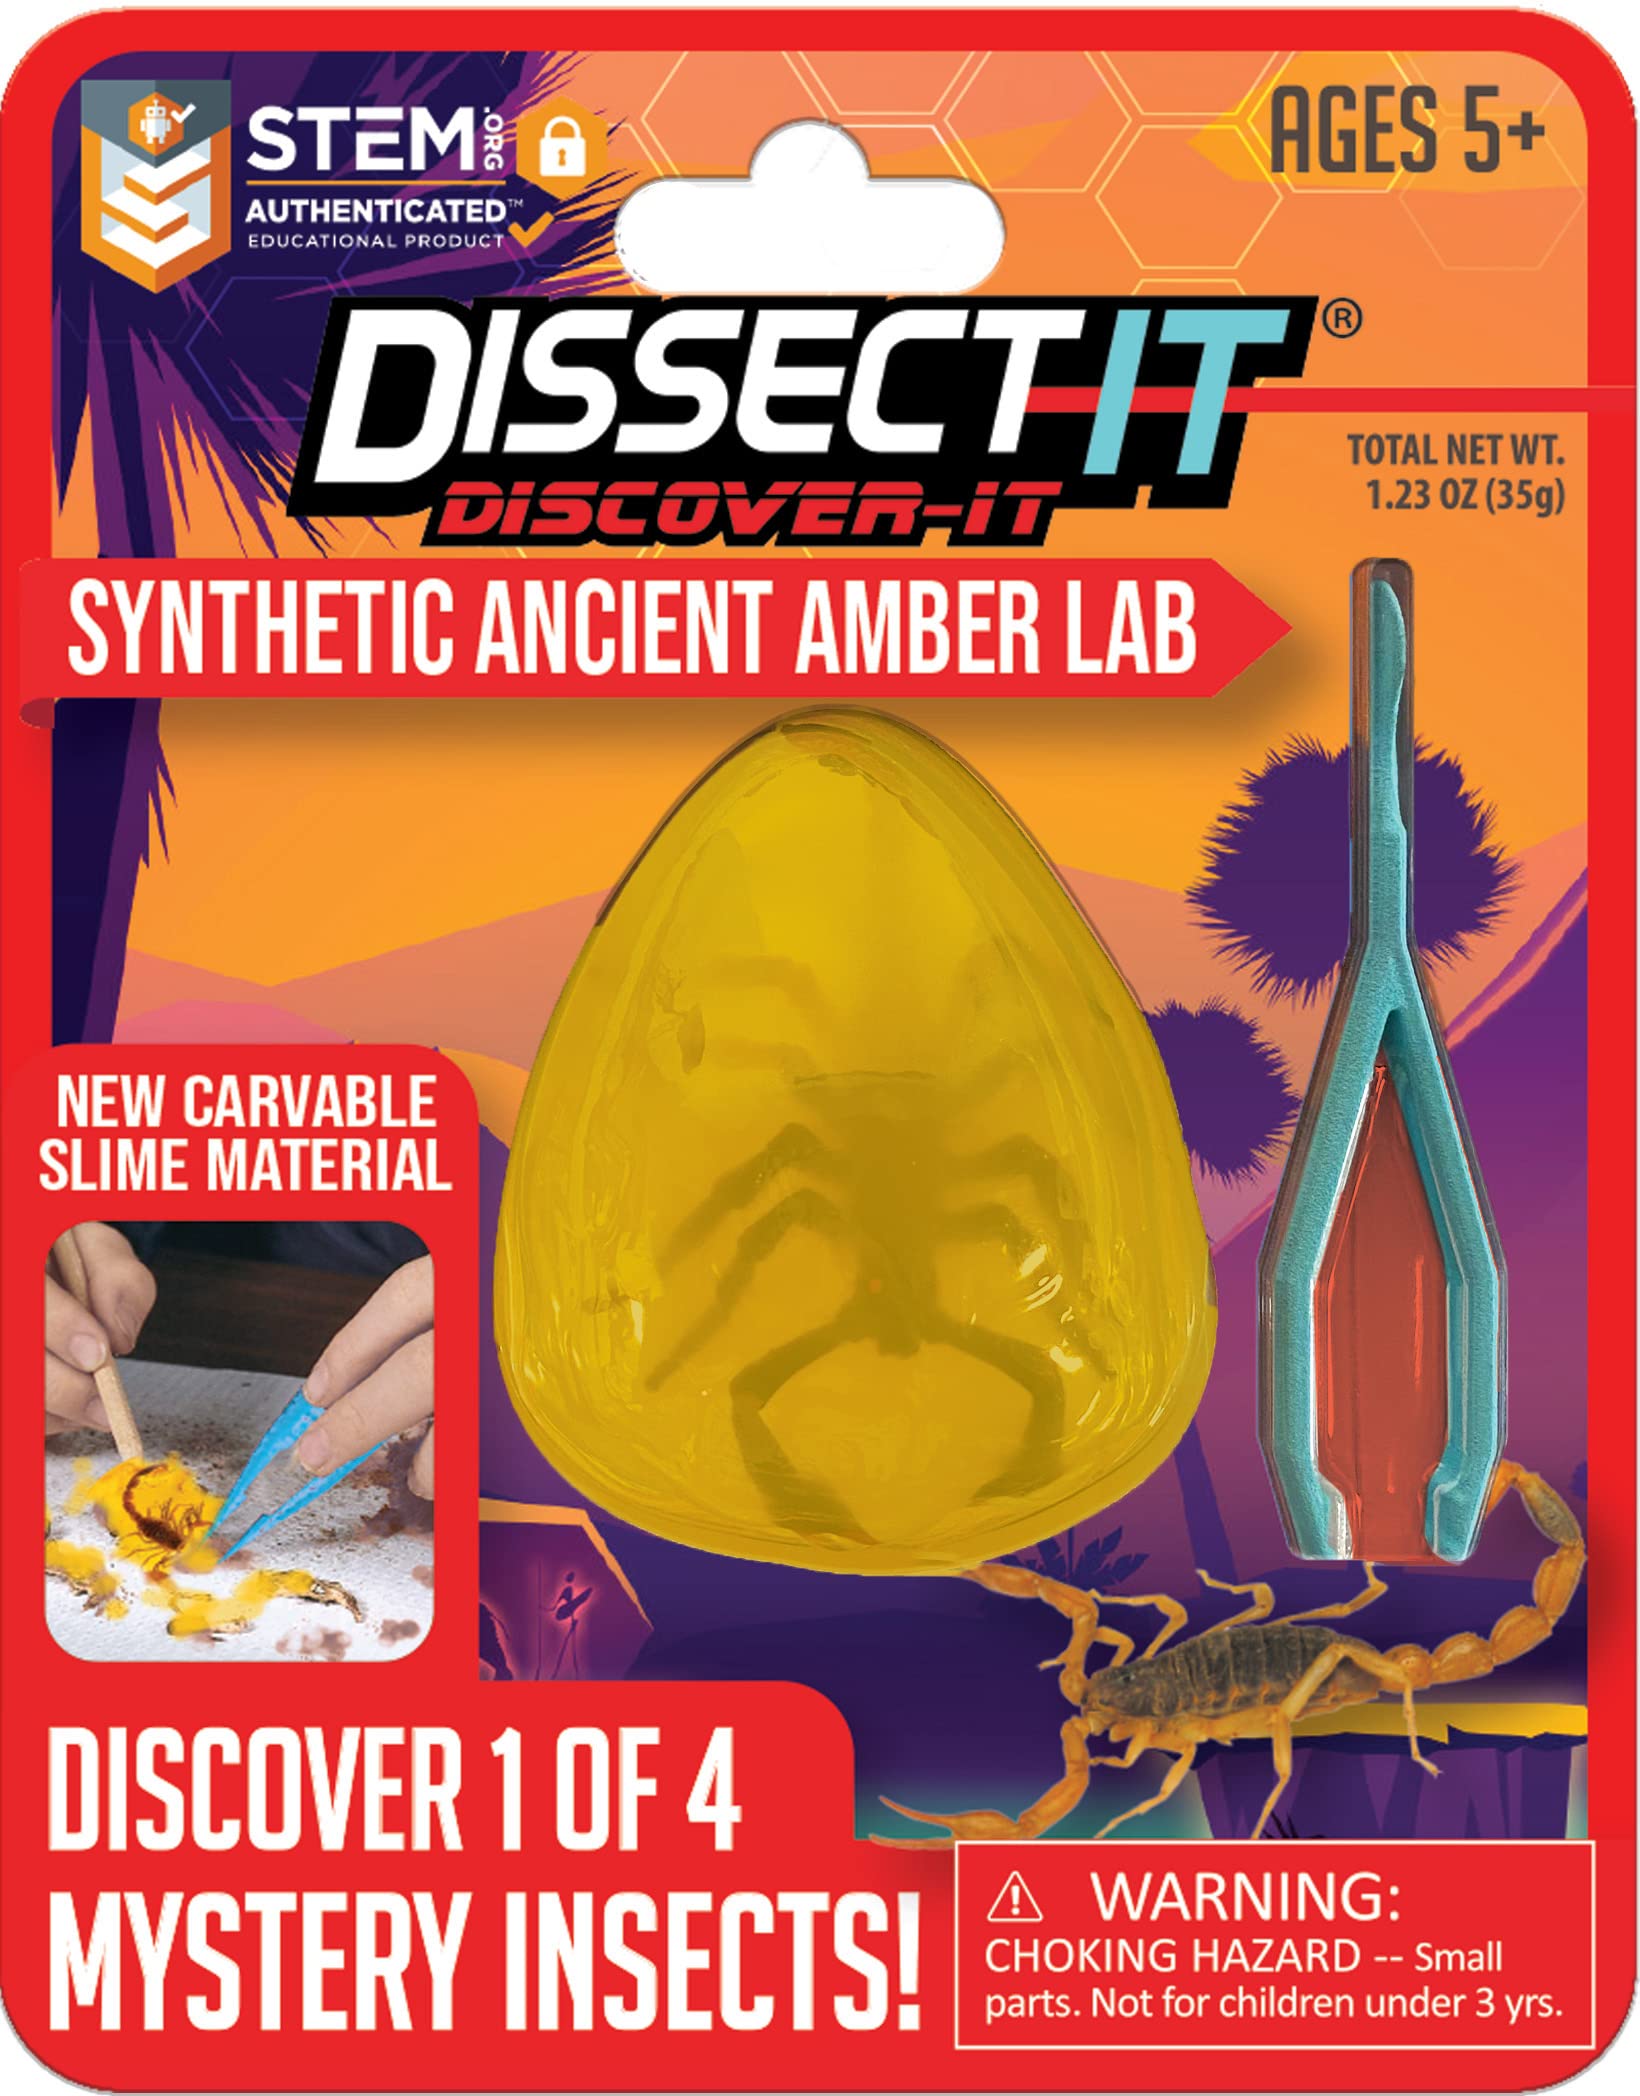 Dissect It: Synthetic Ancient Amber Lab by Top Secret Toys #1125-9912